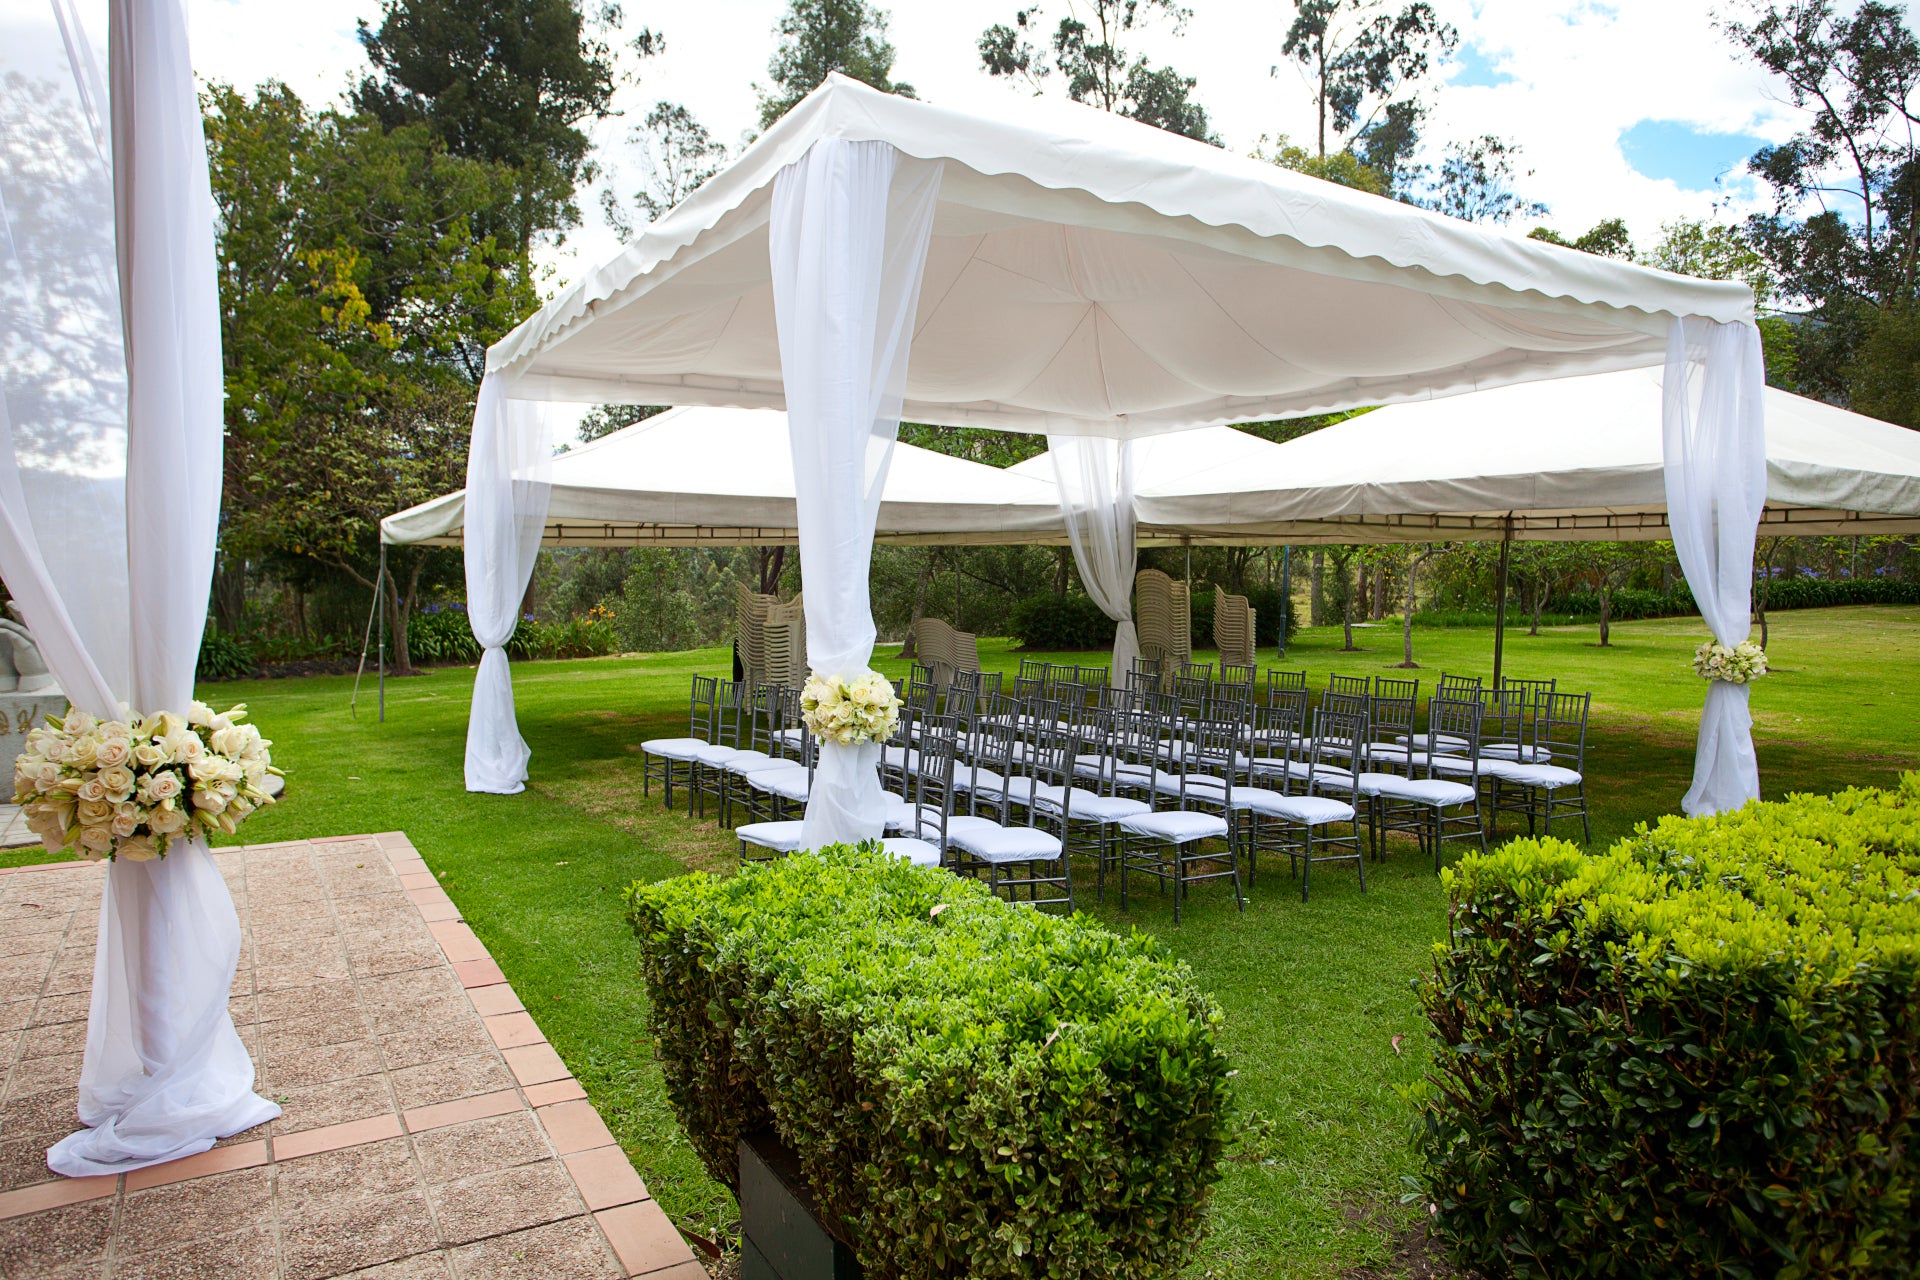 Deluxe Spring Top Marquees